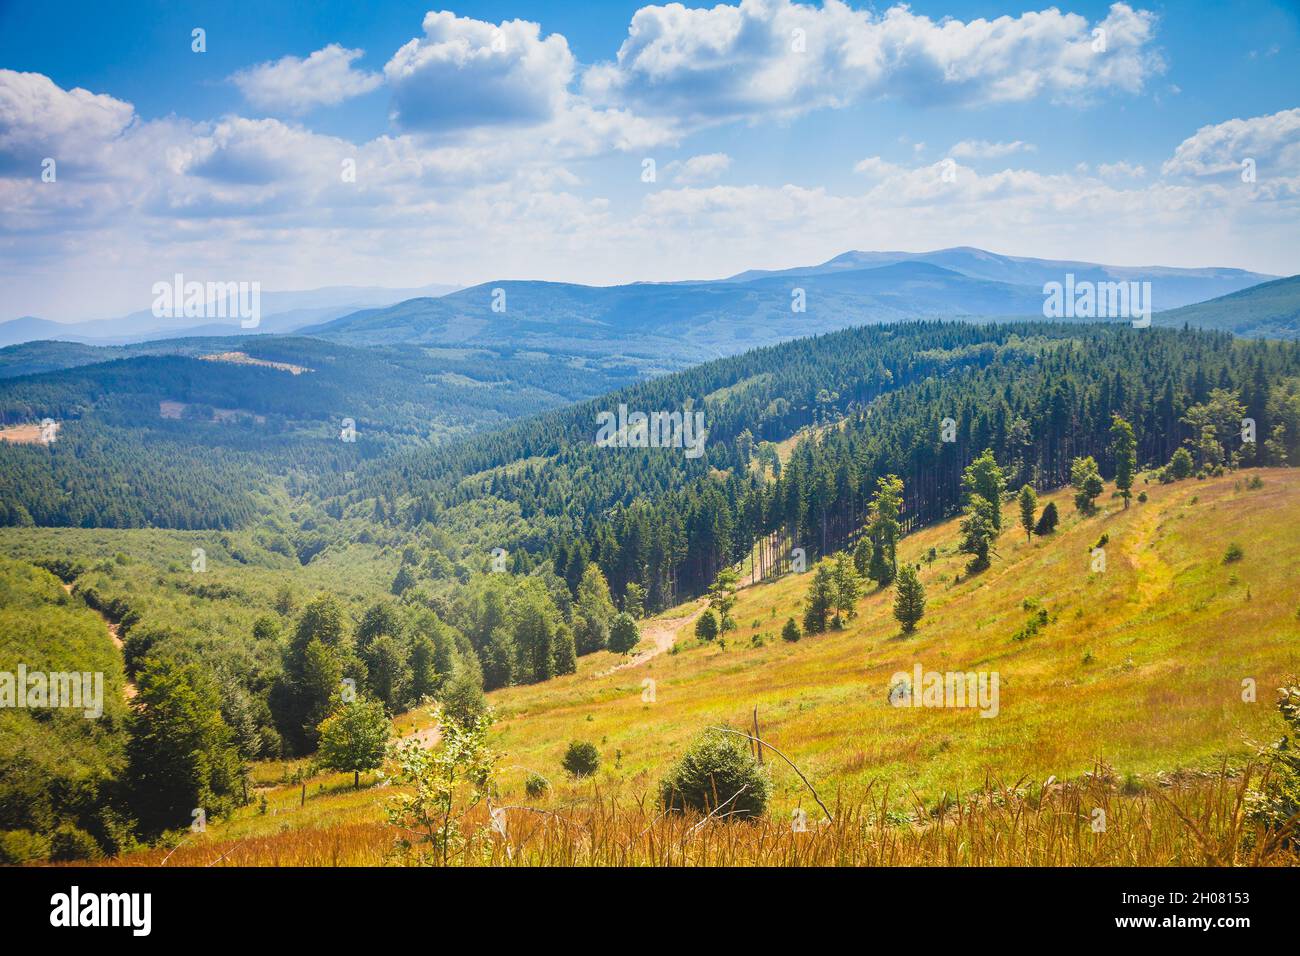 Rich green groves of pine trees growing on the slopes of lesser mountains on the edge of Stara Planina highland, Bulgaria Stock Photo